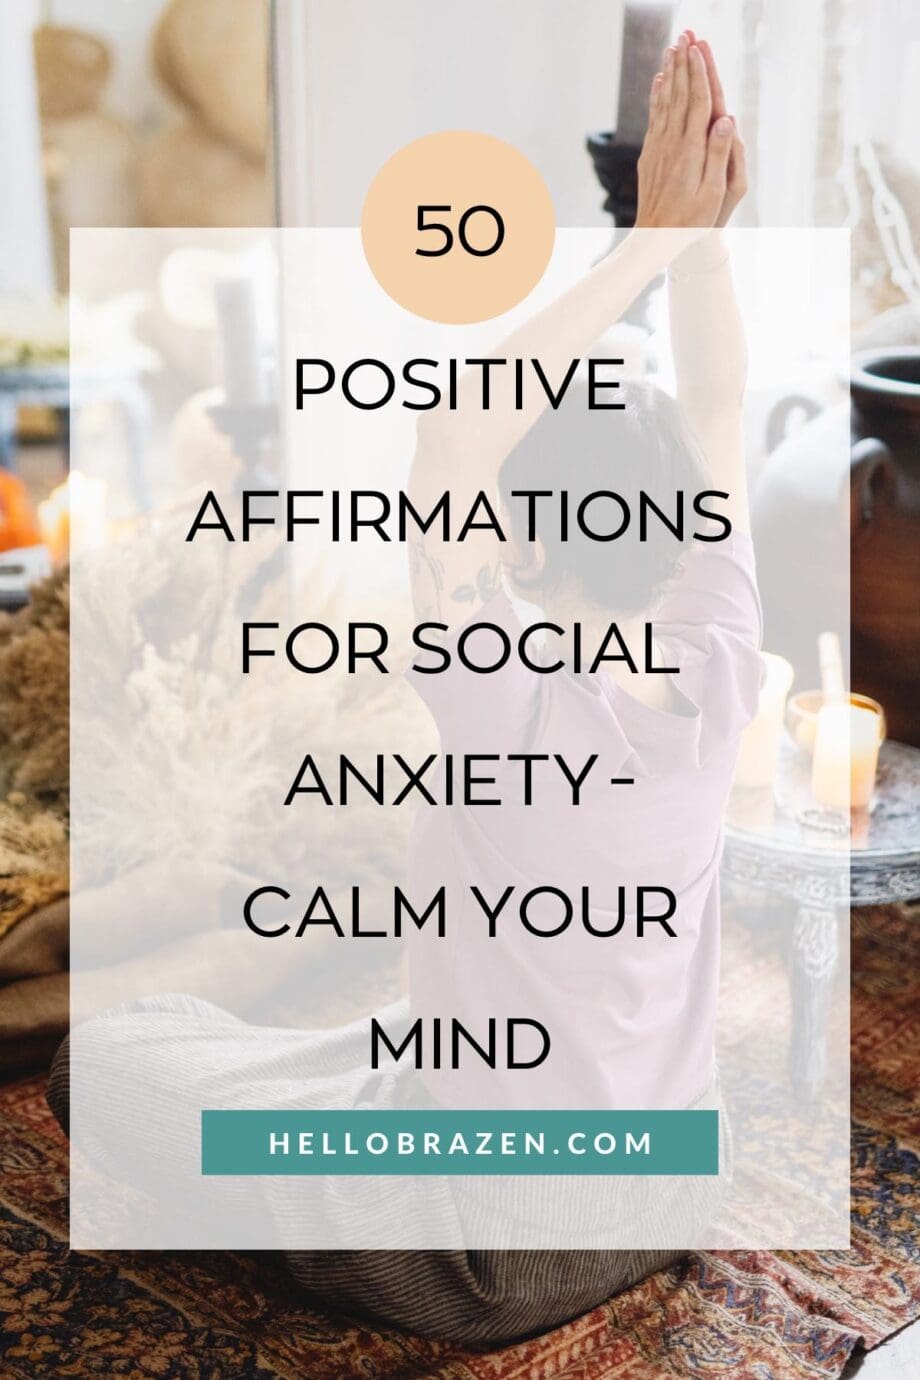 Affirmations can be very helpful for managing social anxiety. So here are 50 positive affirmations for social anxiety to help calm your mind and create positive thoughts.